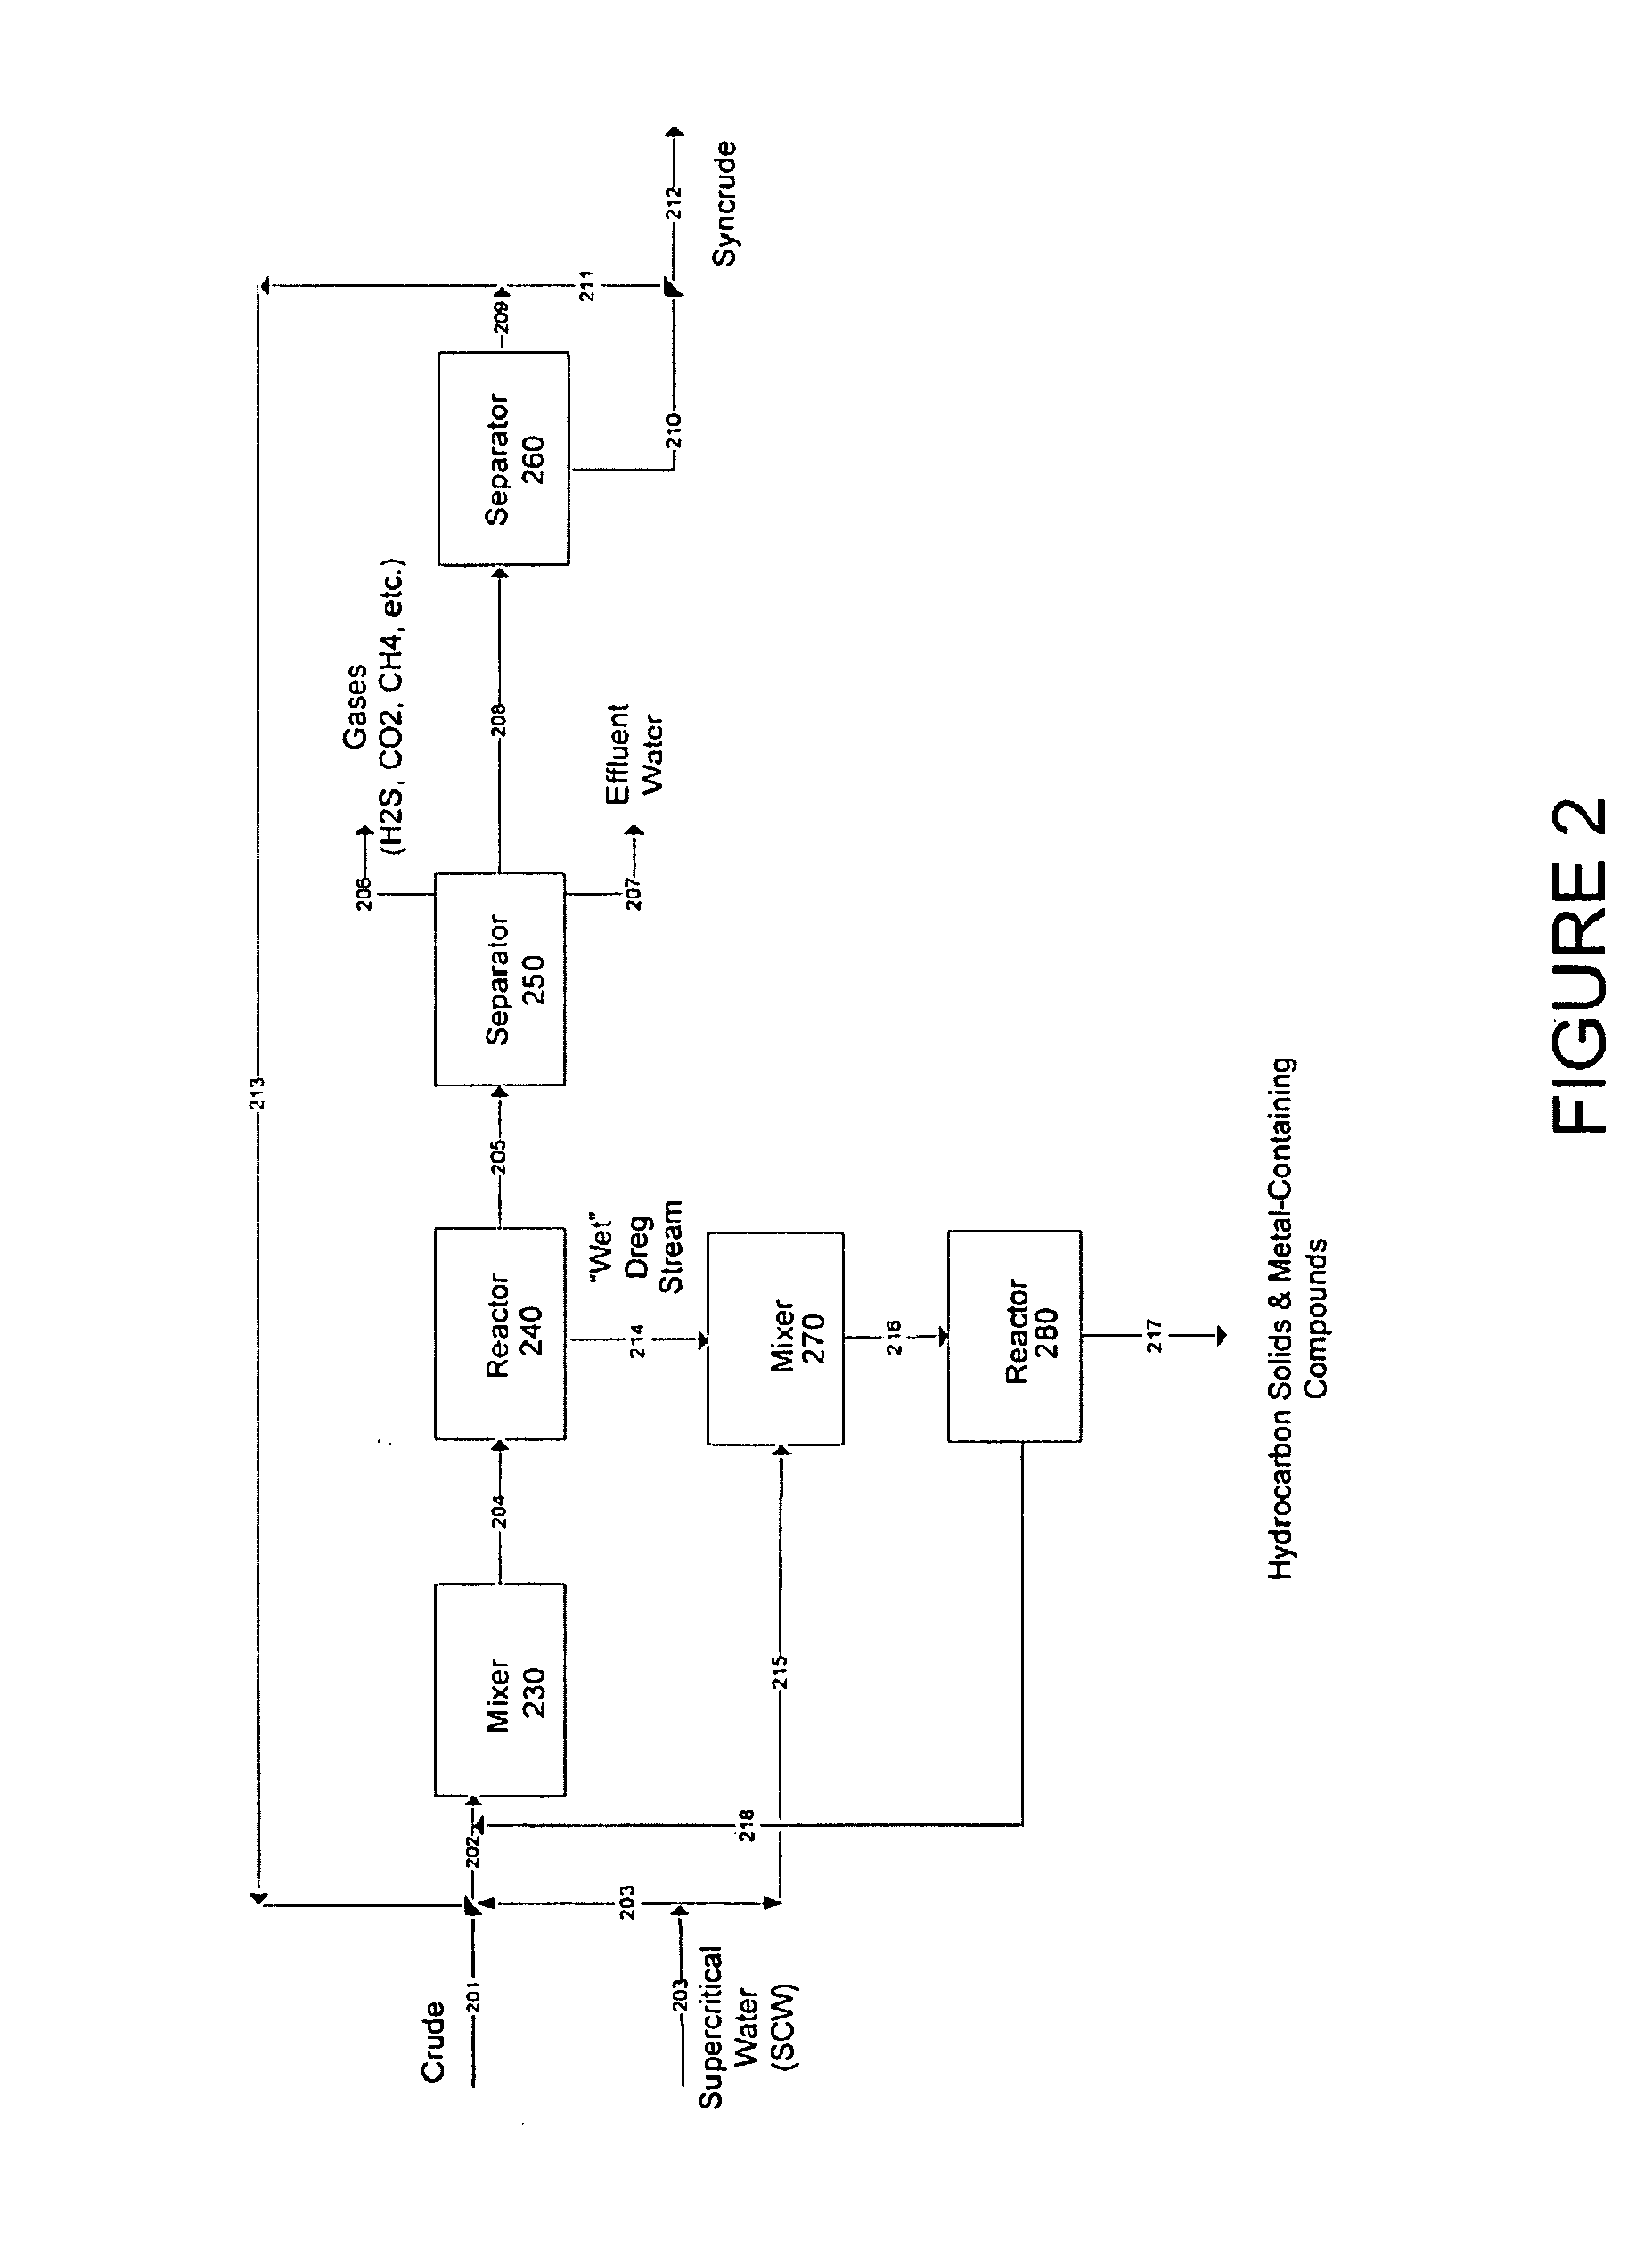 Intergrated process for in-field upgrading of hydrocarbons